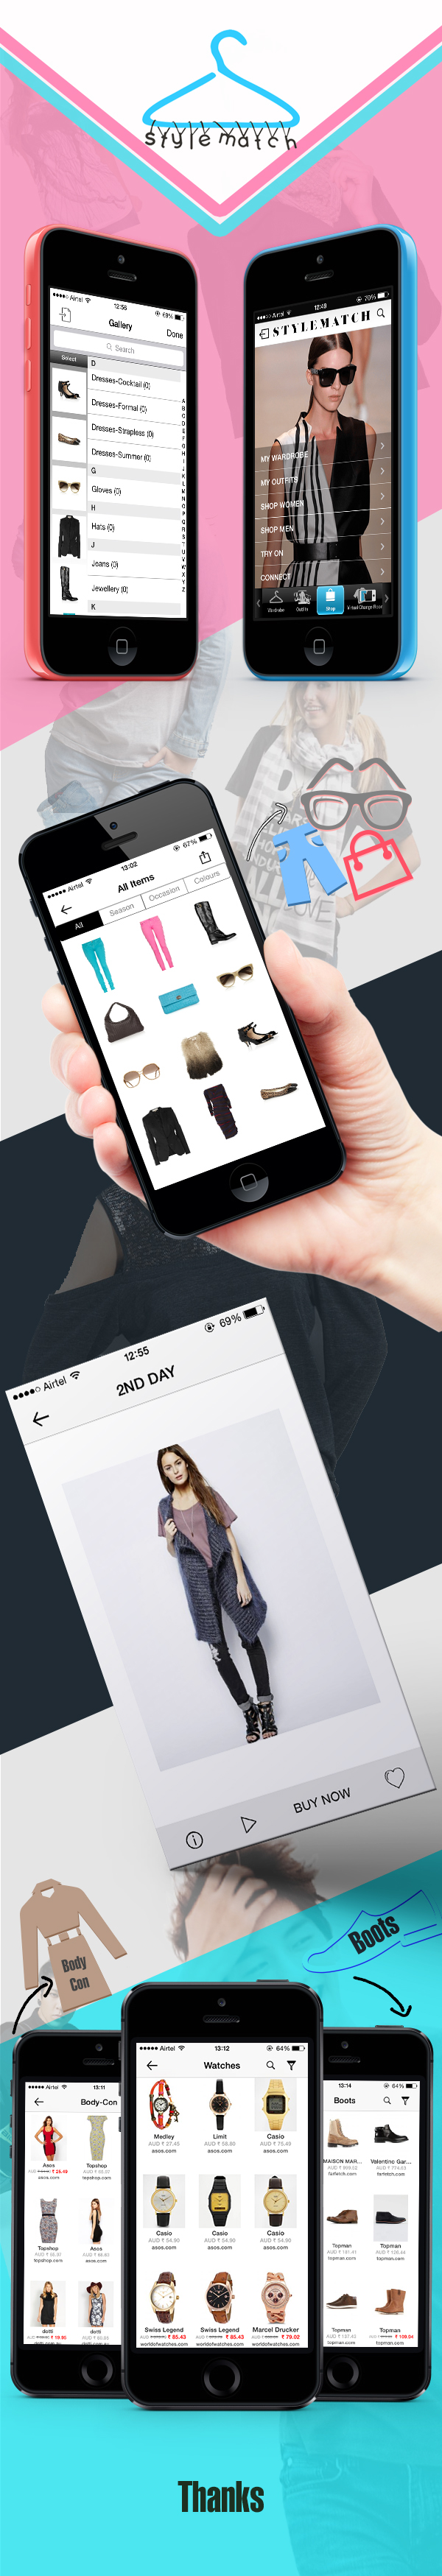 VIRTUAL CHANGE ROOM - AUGMENTED REALITY - DIGITAL WARDROBE - INTERACTIVE OUTFITS - SHOPPING - FLASH SALES - UI app design